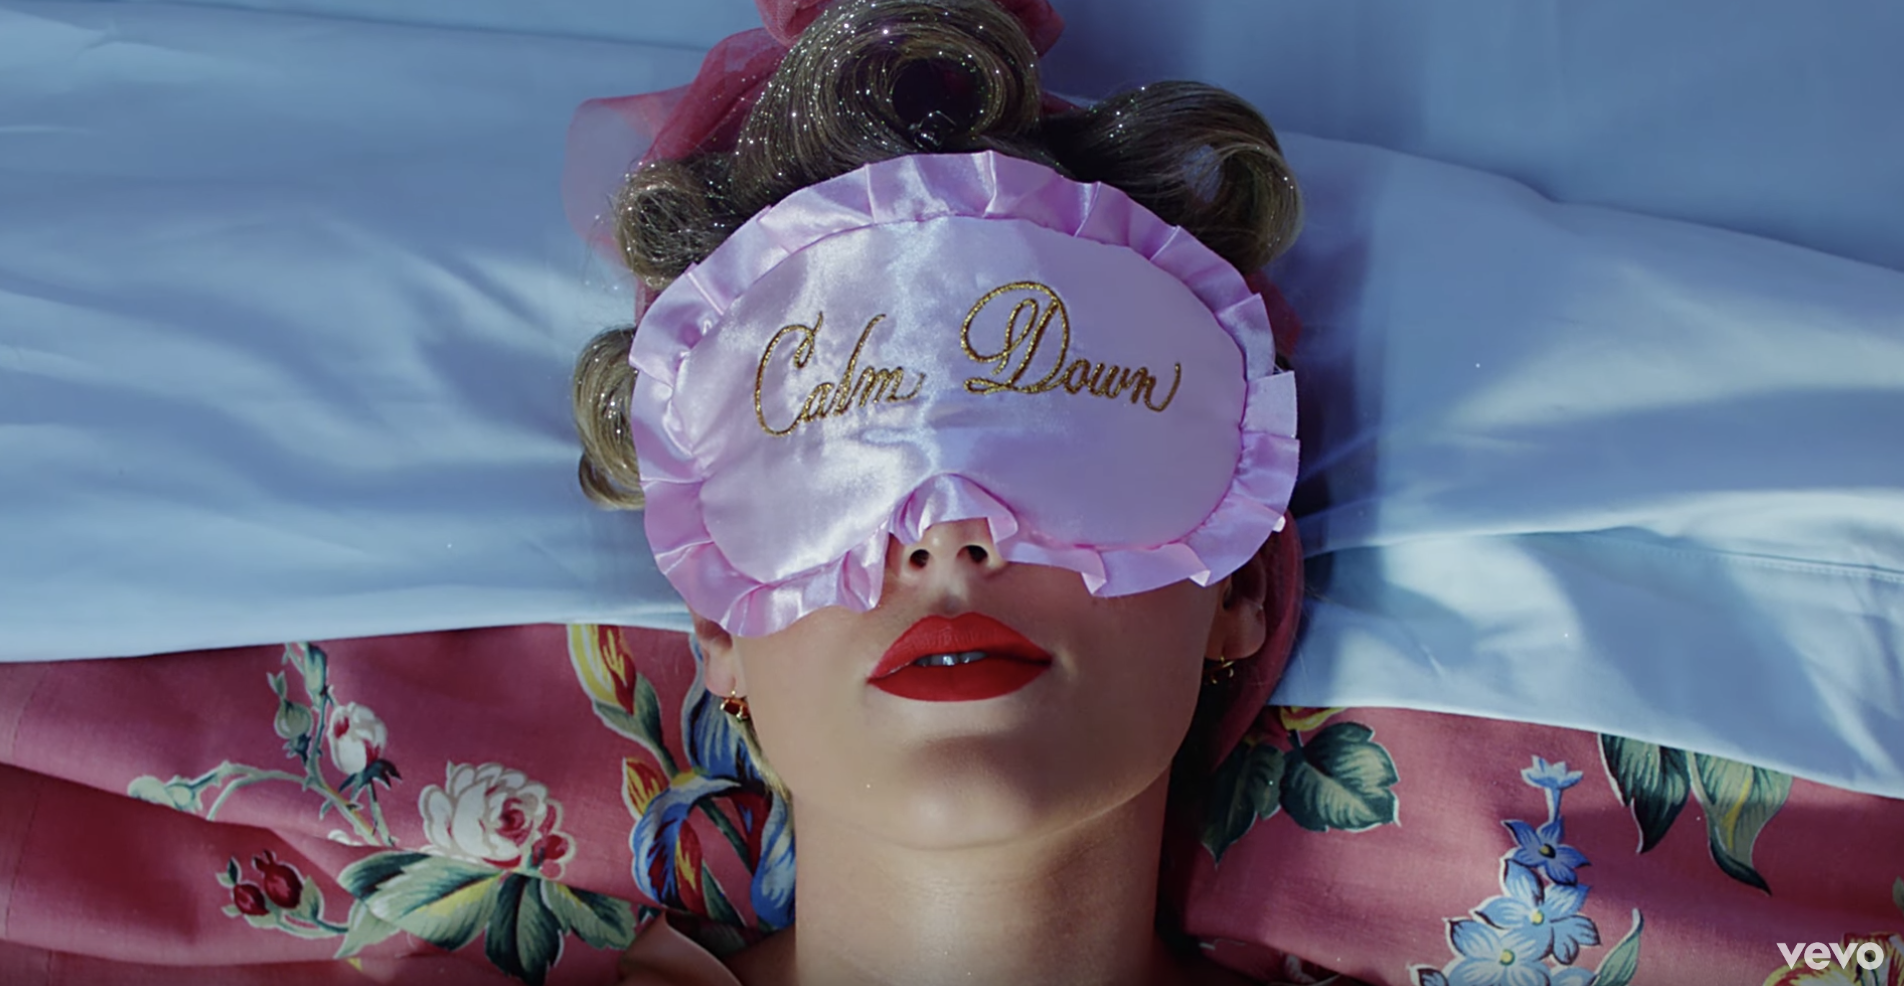 Taylor Swift Style — “You Need To Calm Down” music video